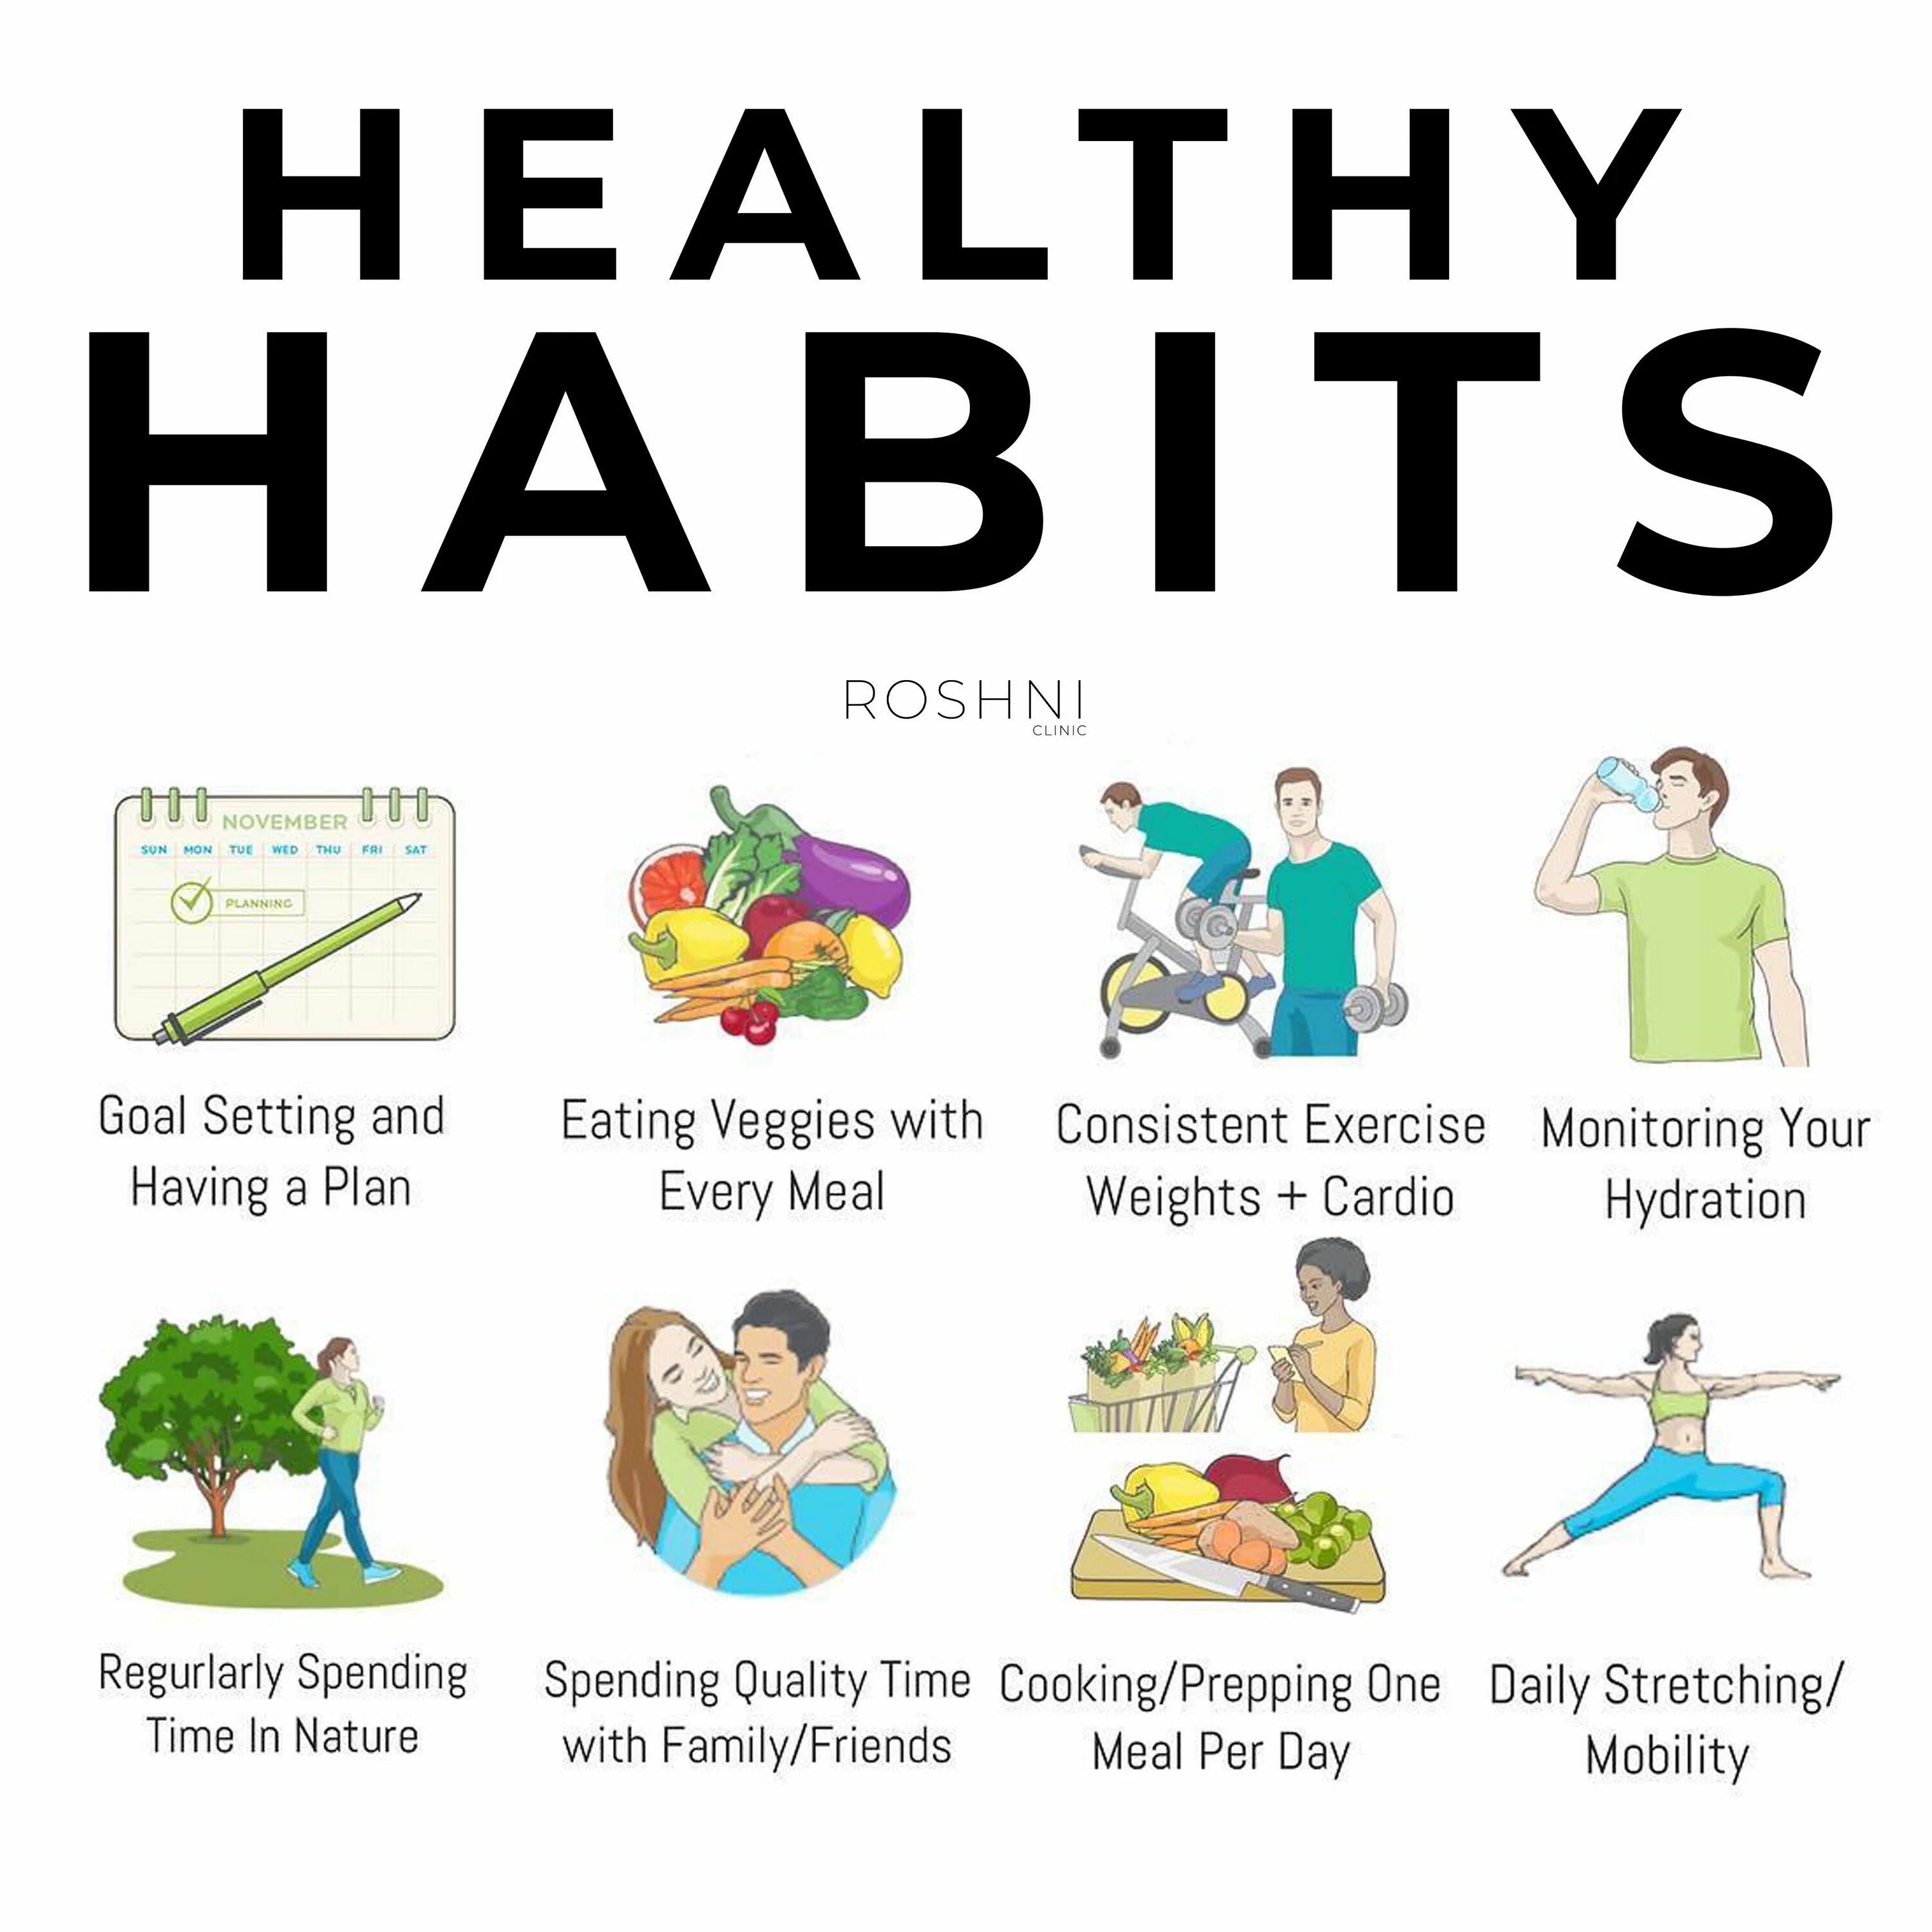 Habits for a healthy Lifestyle картинками. Healthy Habits. Healthy Lifestyle and healthy Habits. Healthy Lifestyle Habits. How's your health